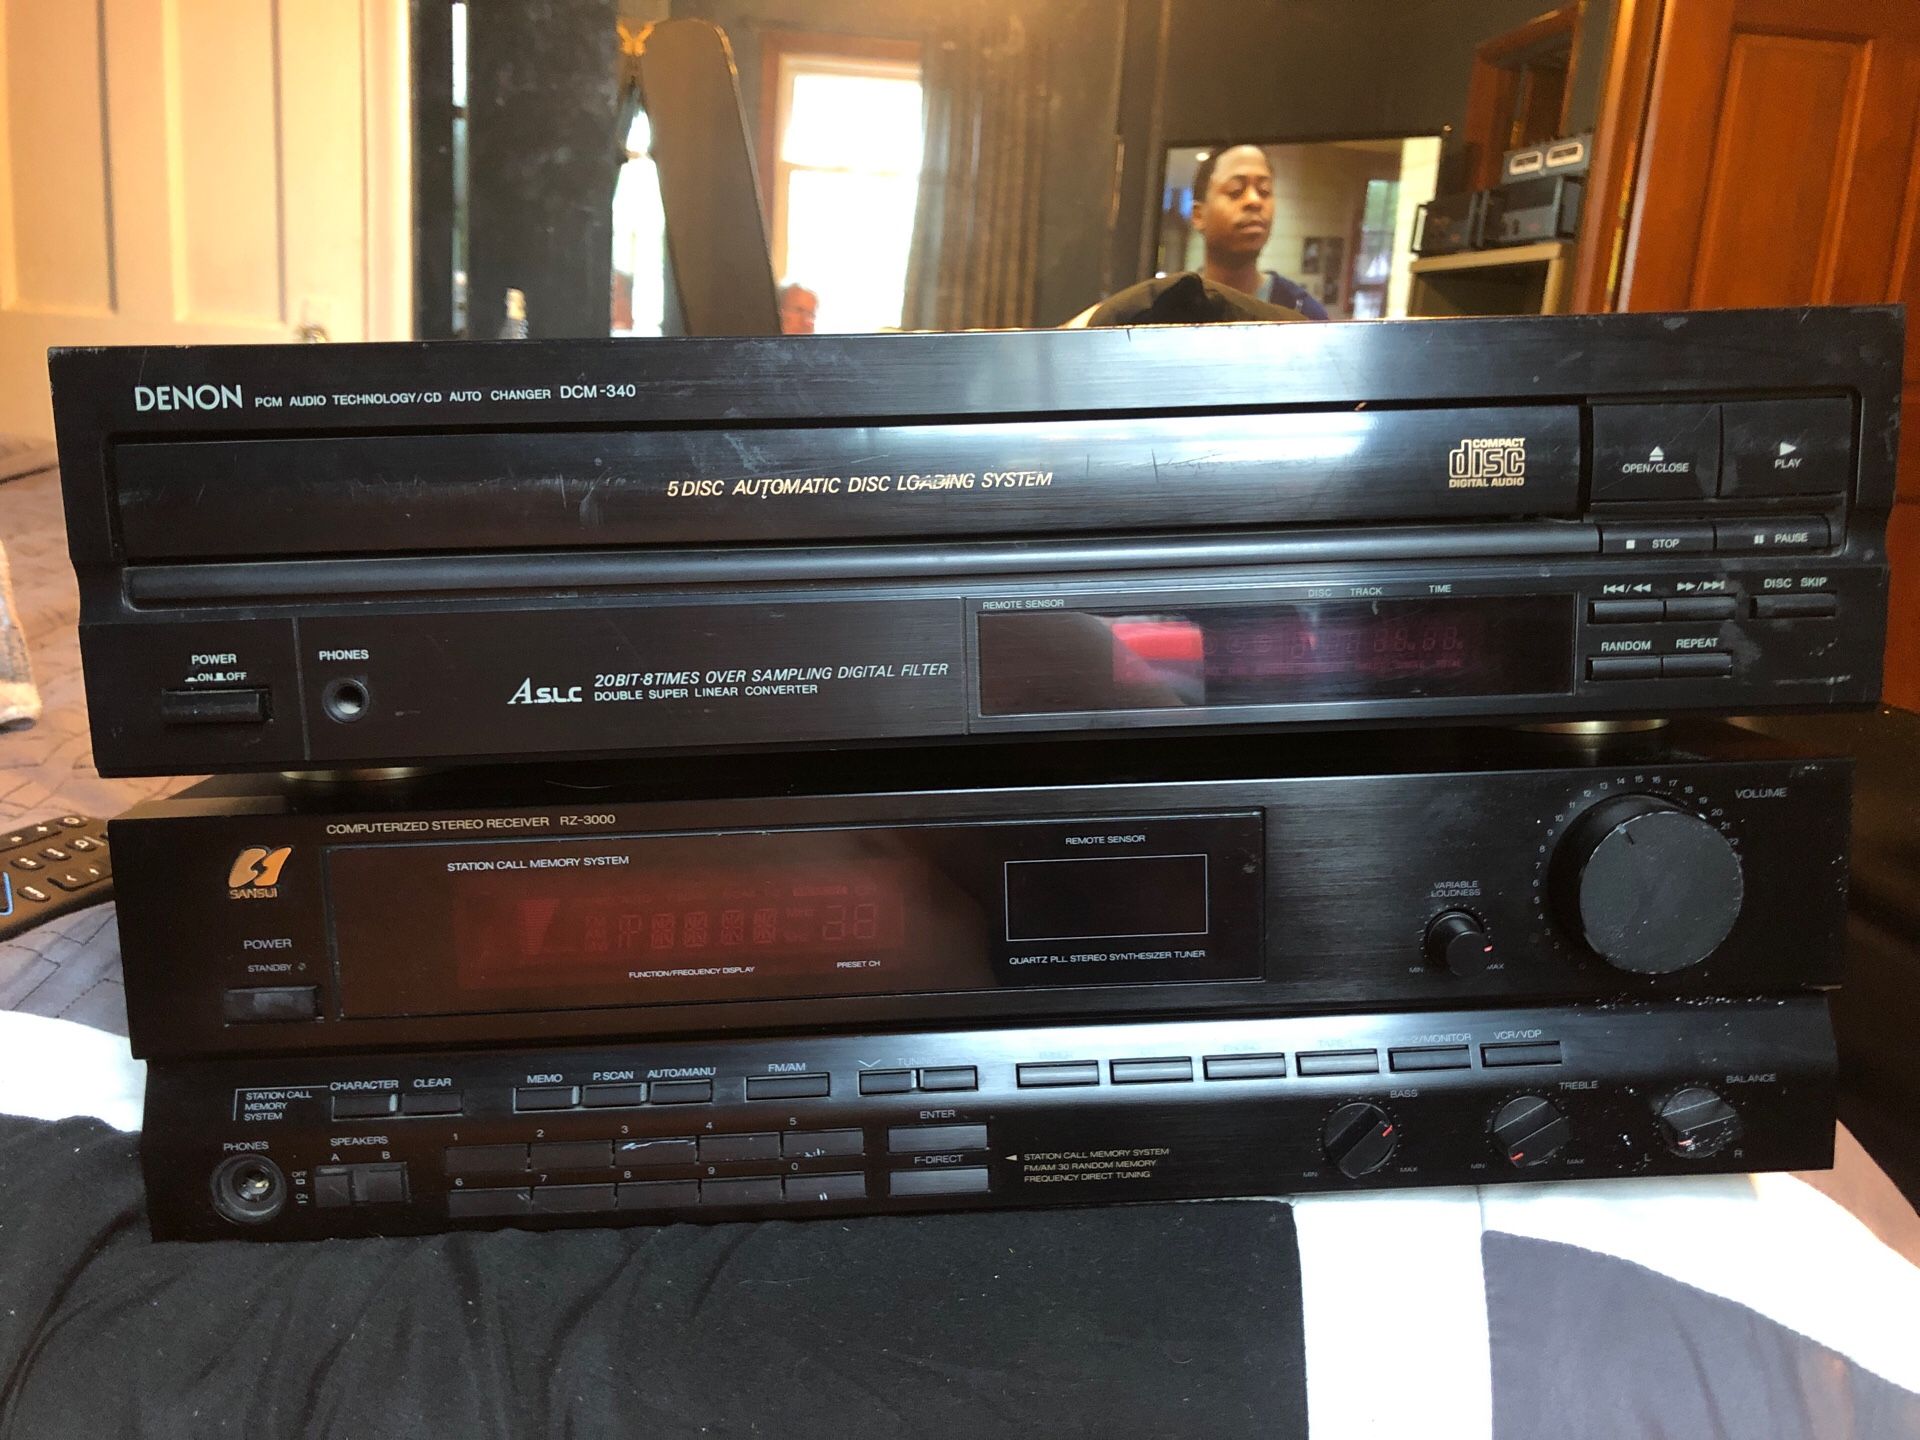 Stereo receiver and denim 5 disc CD player